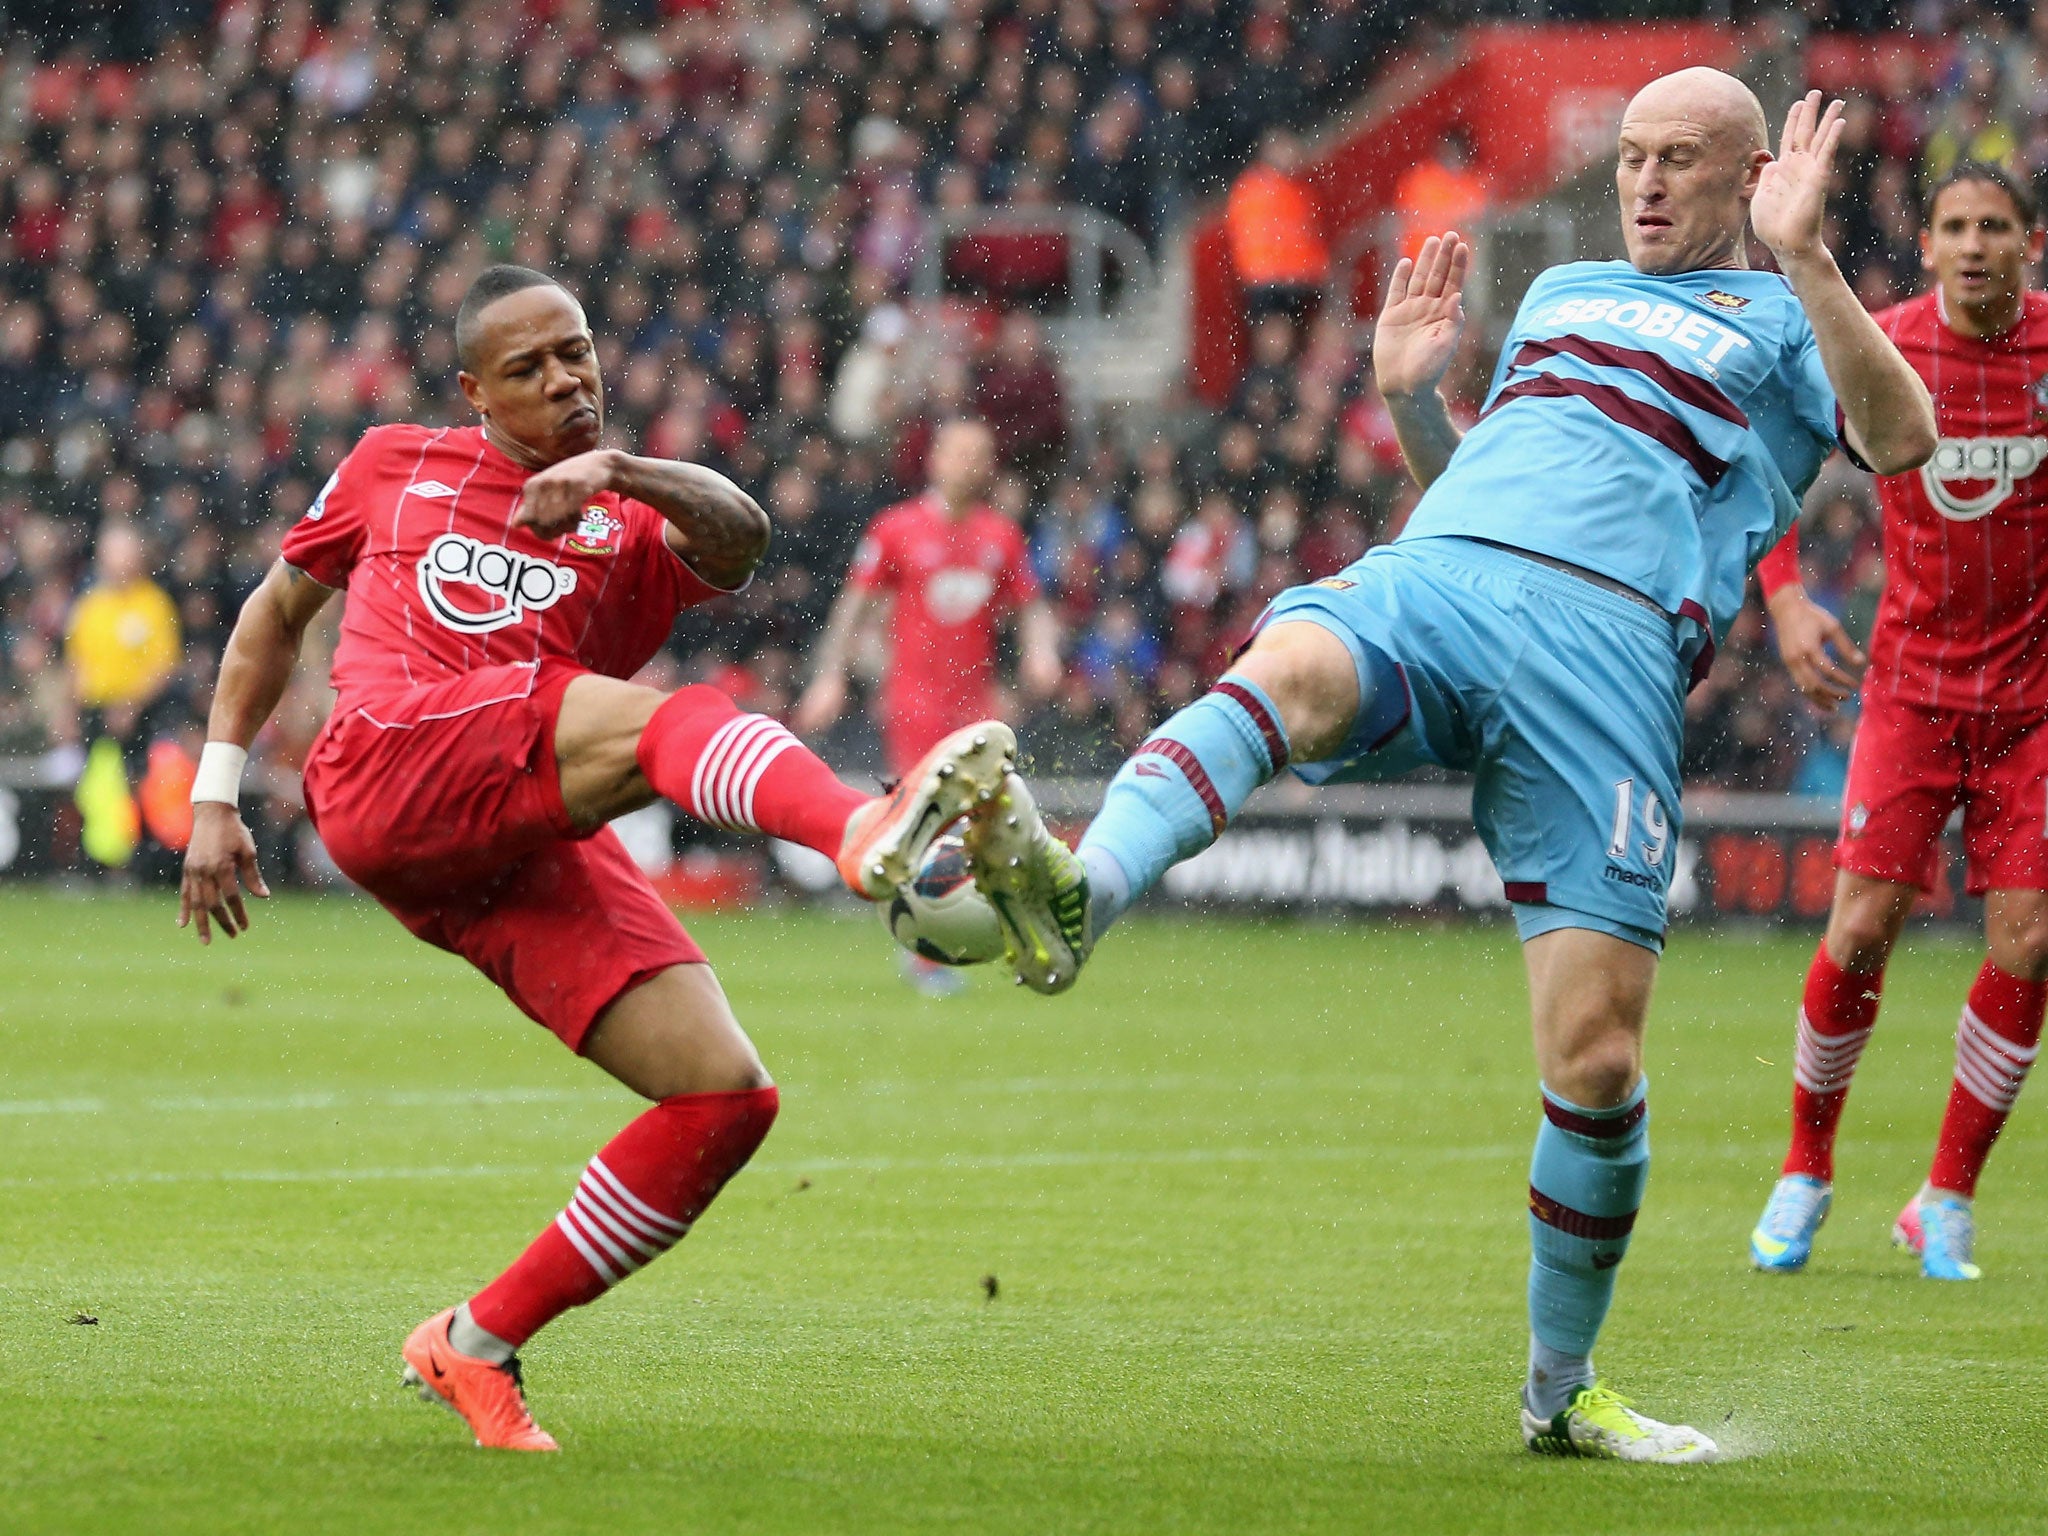 James Collins of West Ham tries to tackle Nathamiel Clyne of Southampton